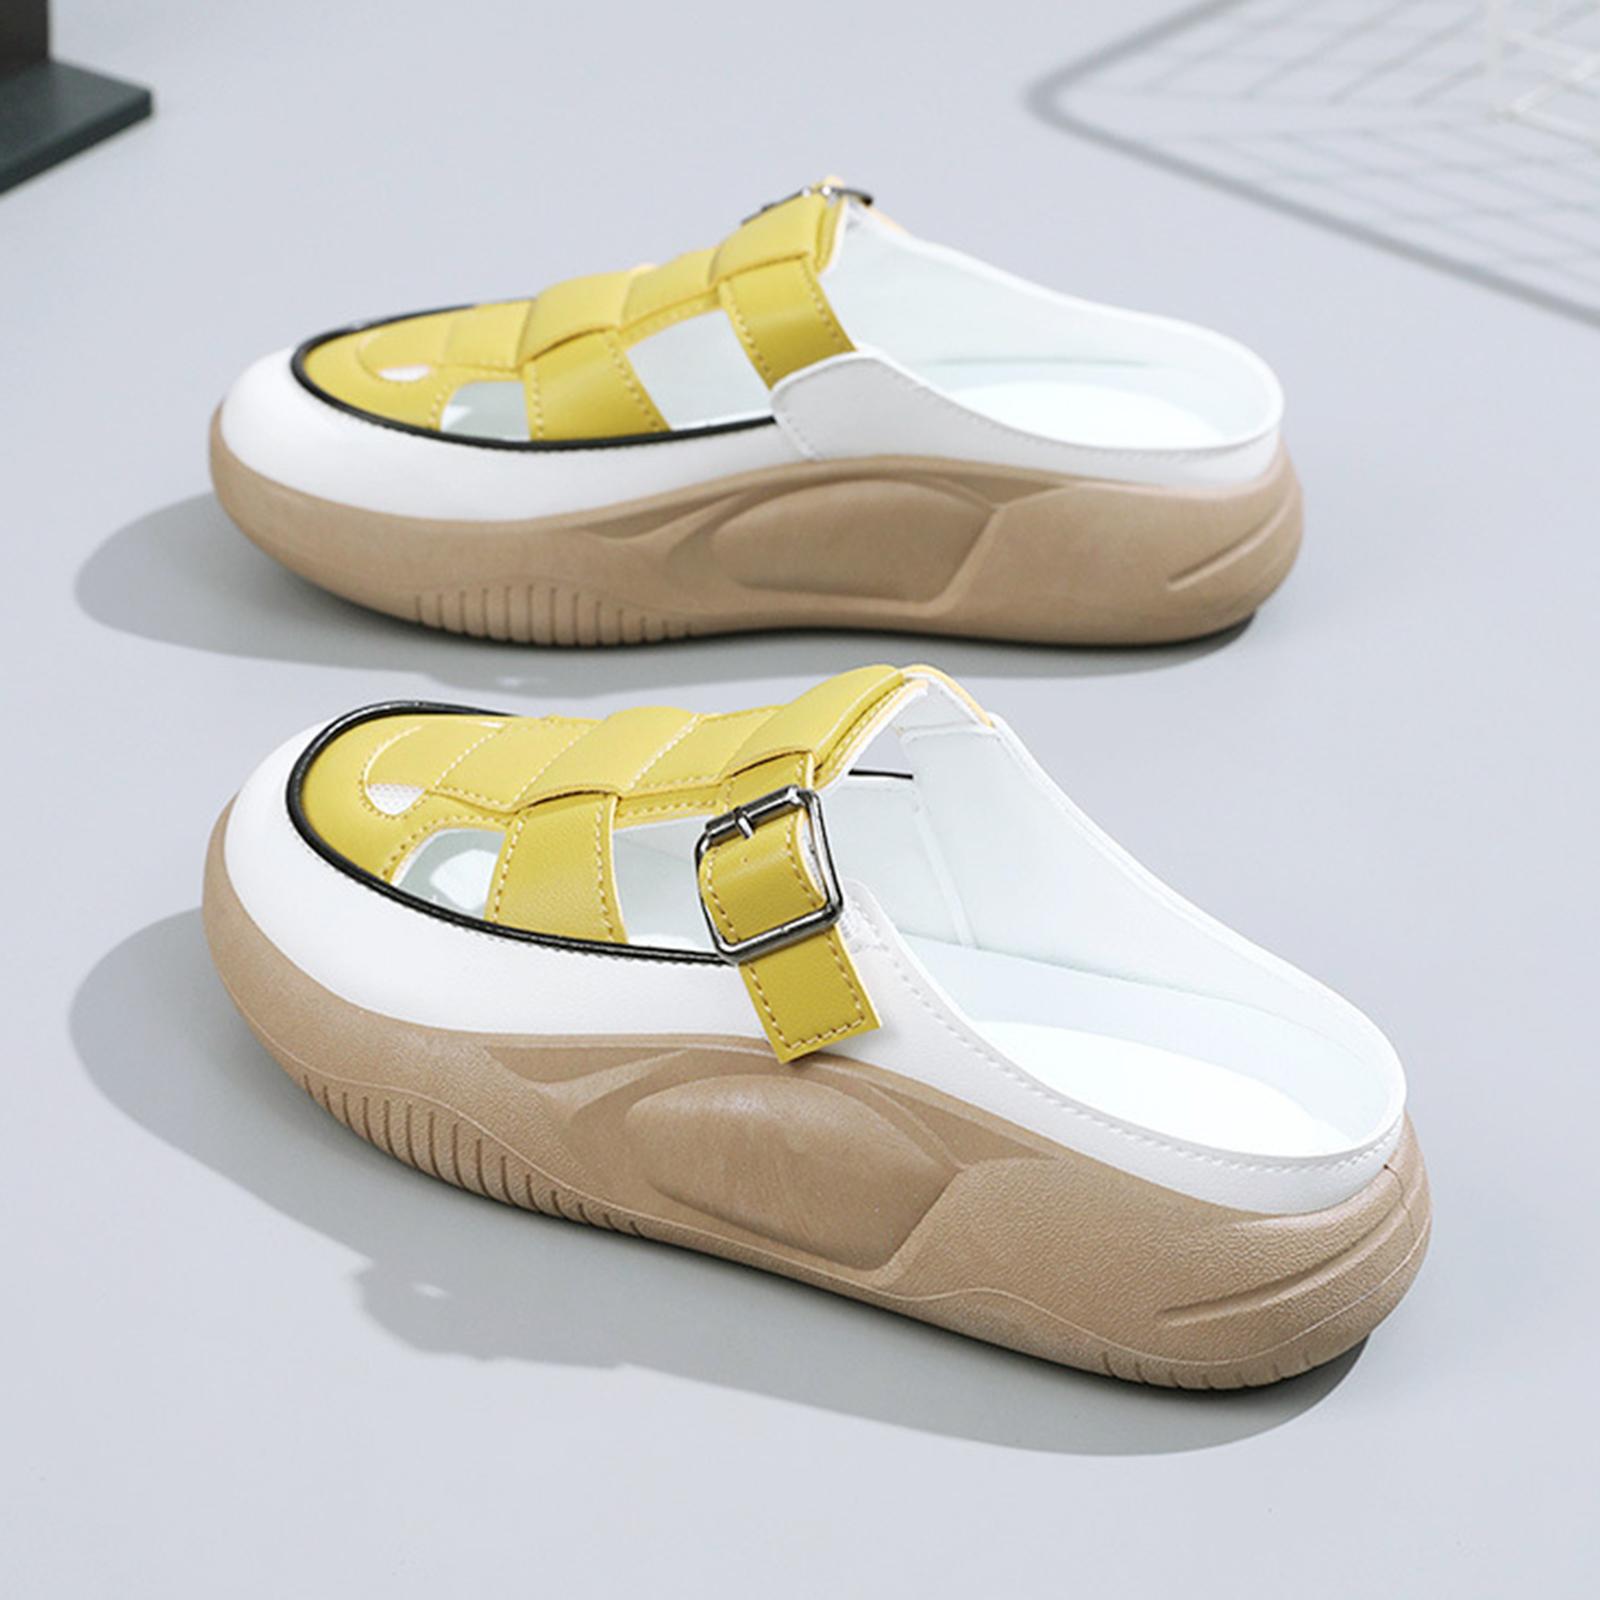 Women's Slide Sandals Comfortable Flat Shoes 5cm Thick Sole Nonslip Slippers Yellow 37